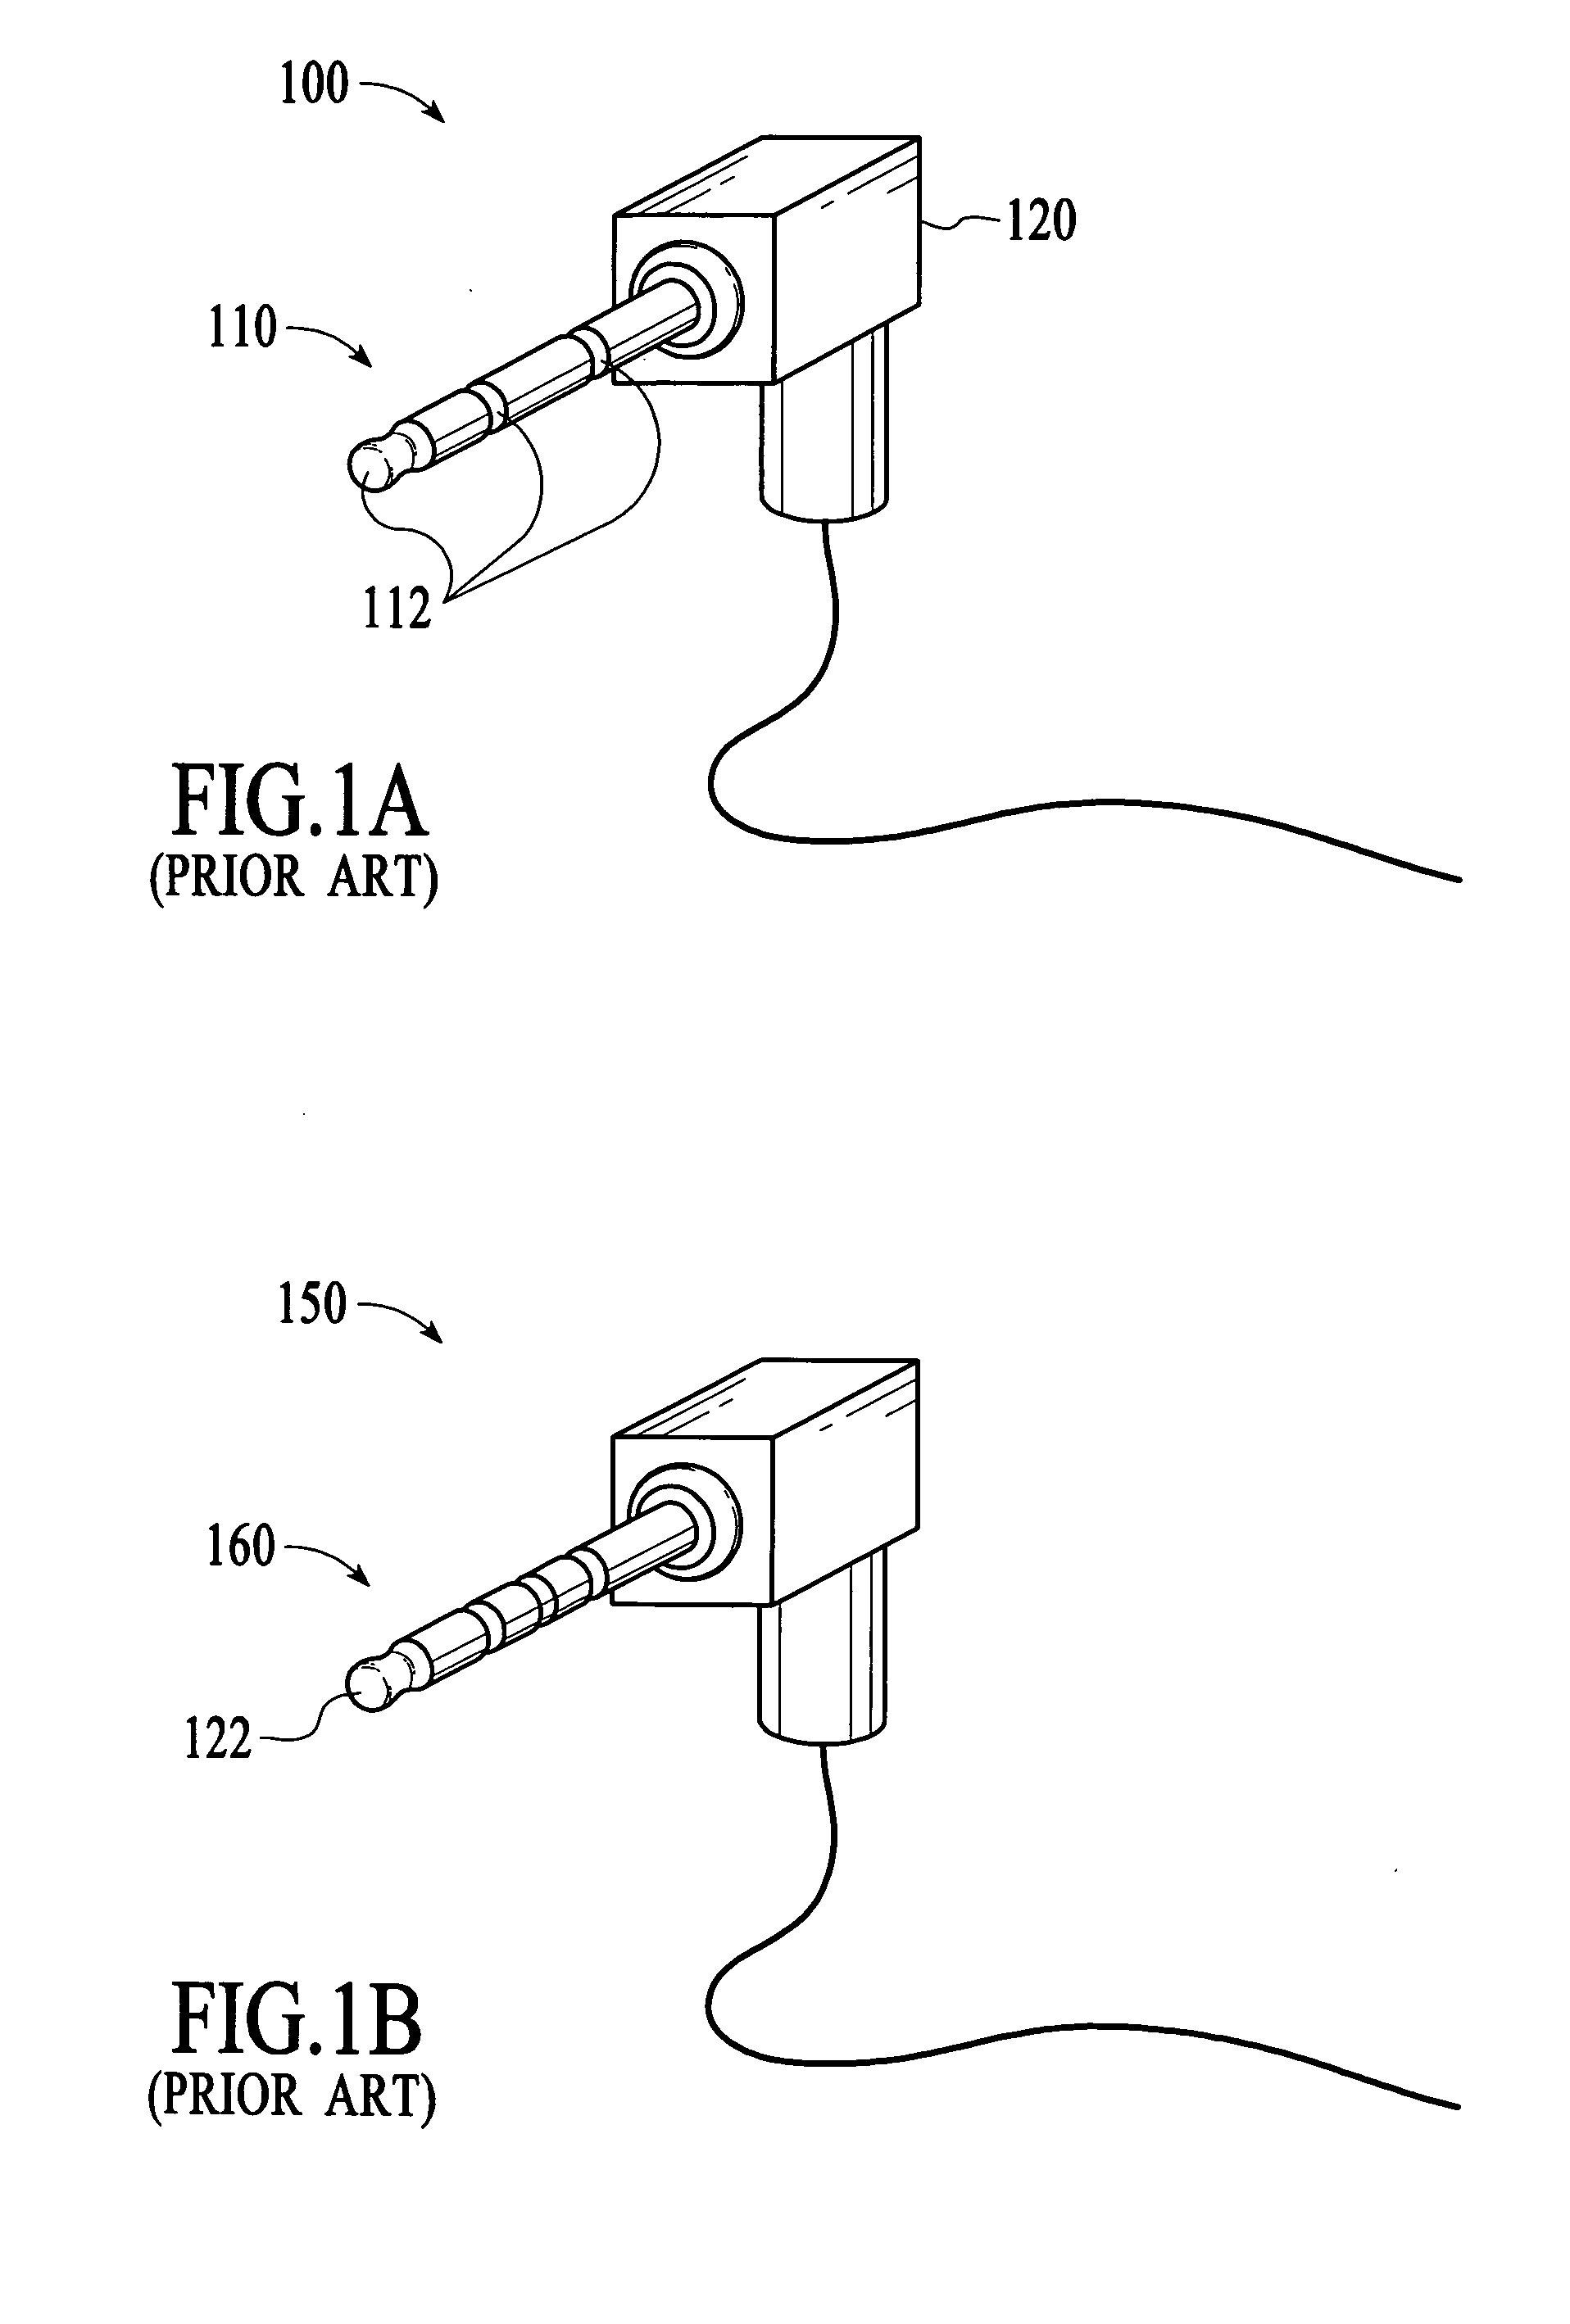 Connector system for supporting multiple types of plug carrying accessory devices